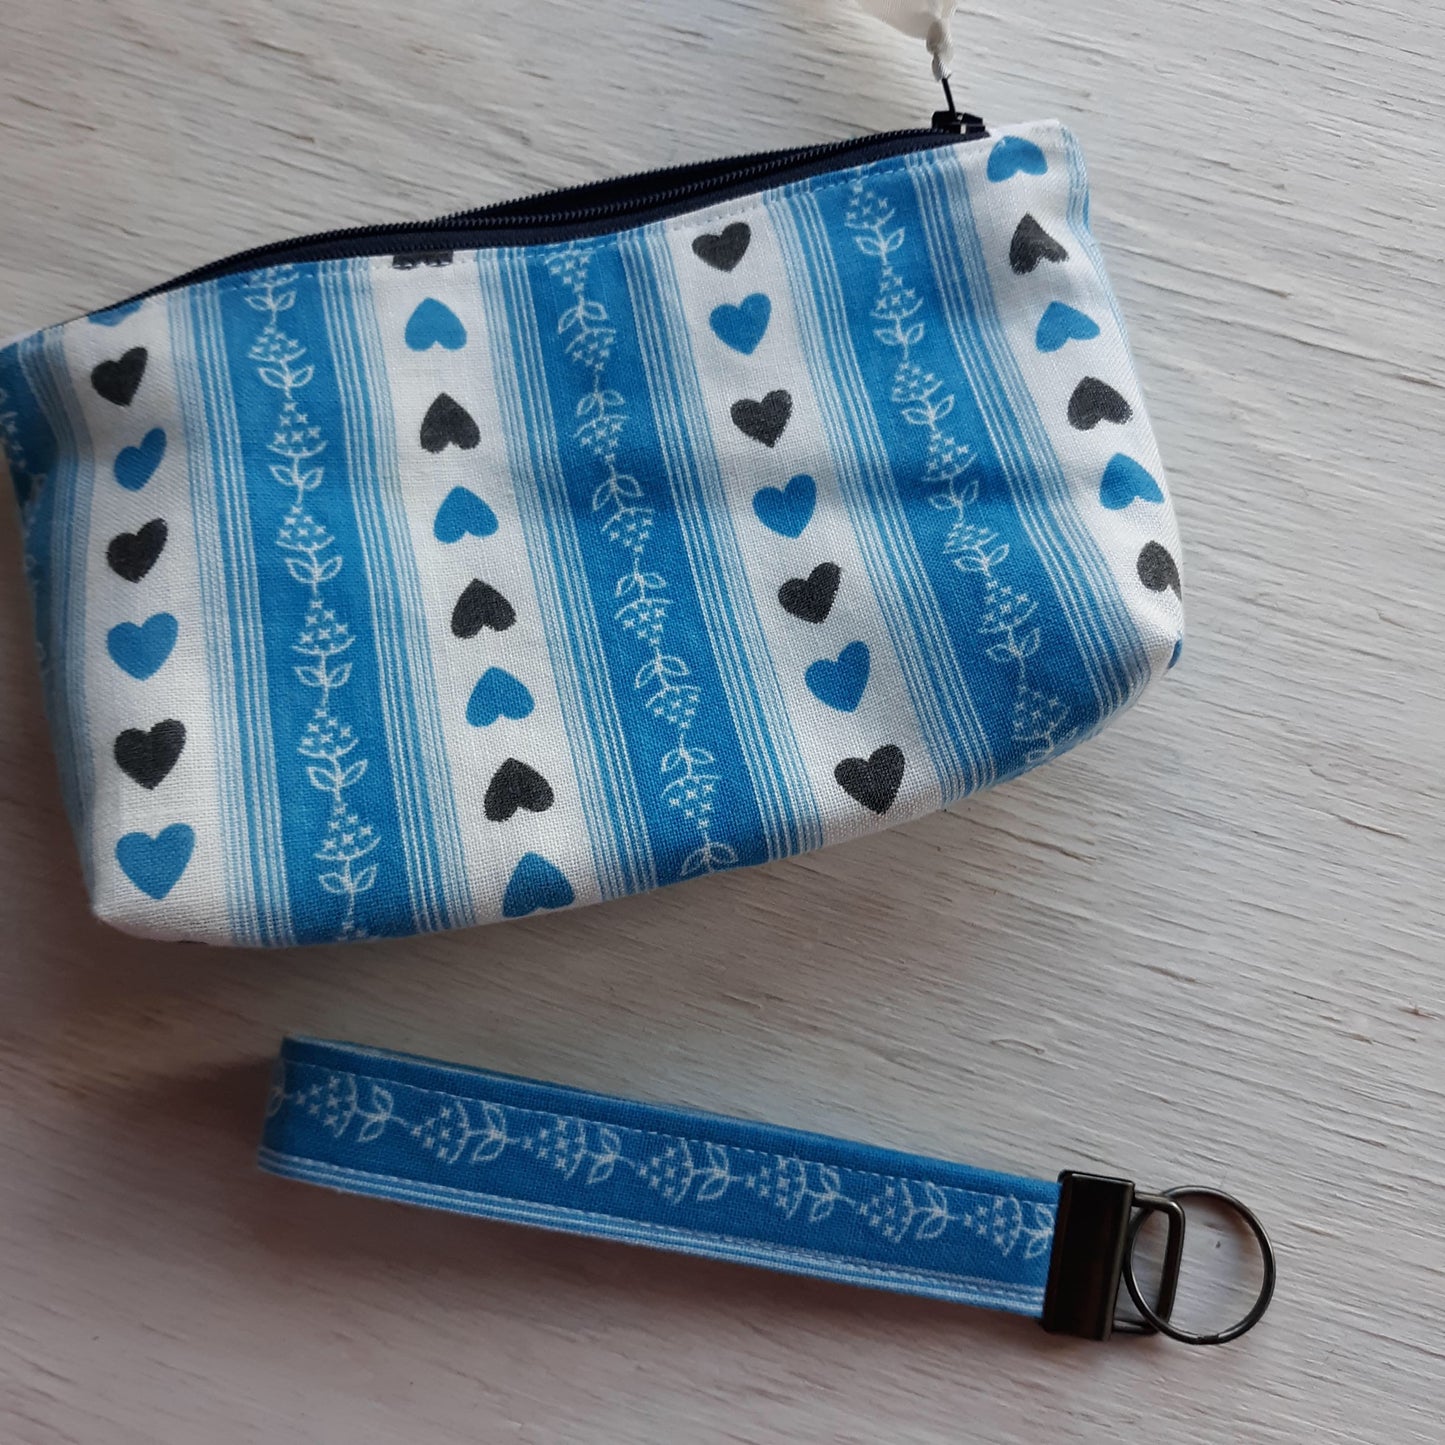 Vintage Feedsack Zipper Pouch with optional Key Fob